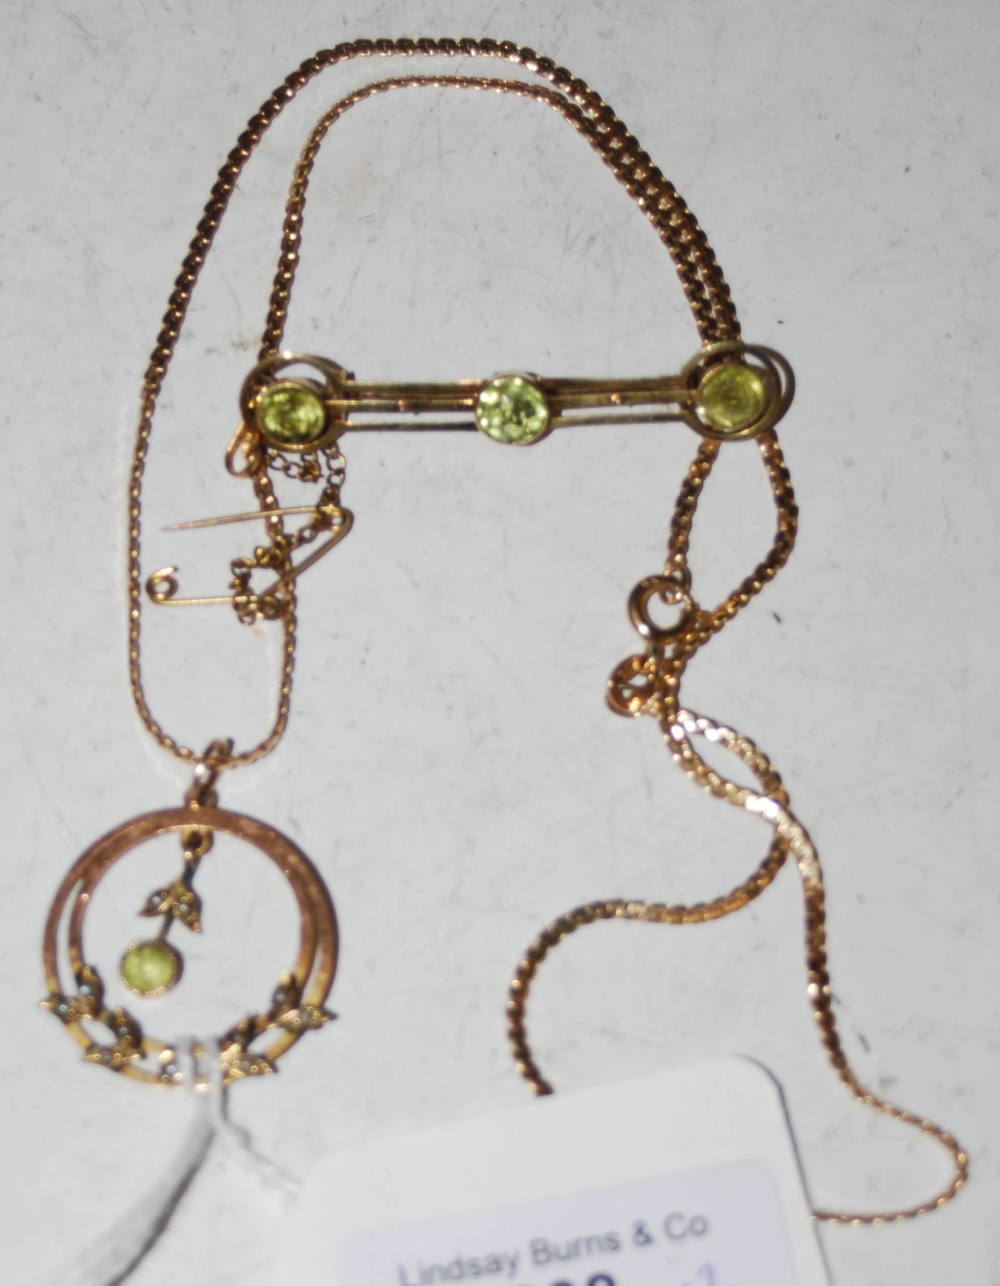 A YELLOW METAL, SPLIT PEARL AND PERIDOT PENDANT SUSPENDED ON 9CT GOLD CHAIN TOGETHER WITH A YELLOW